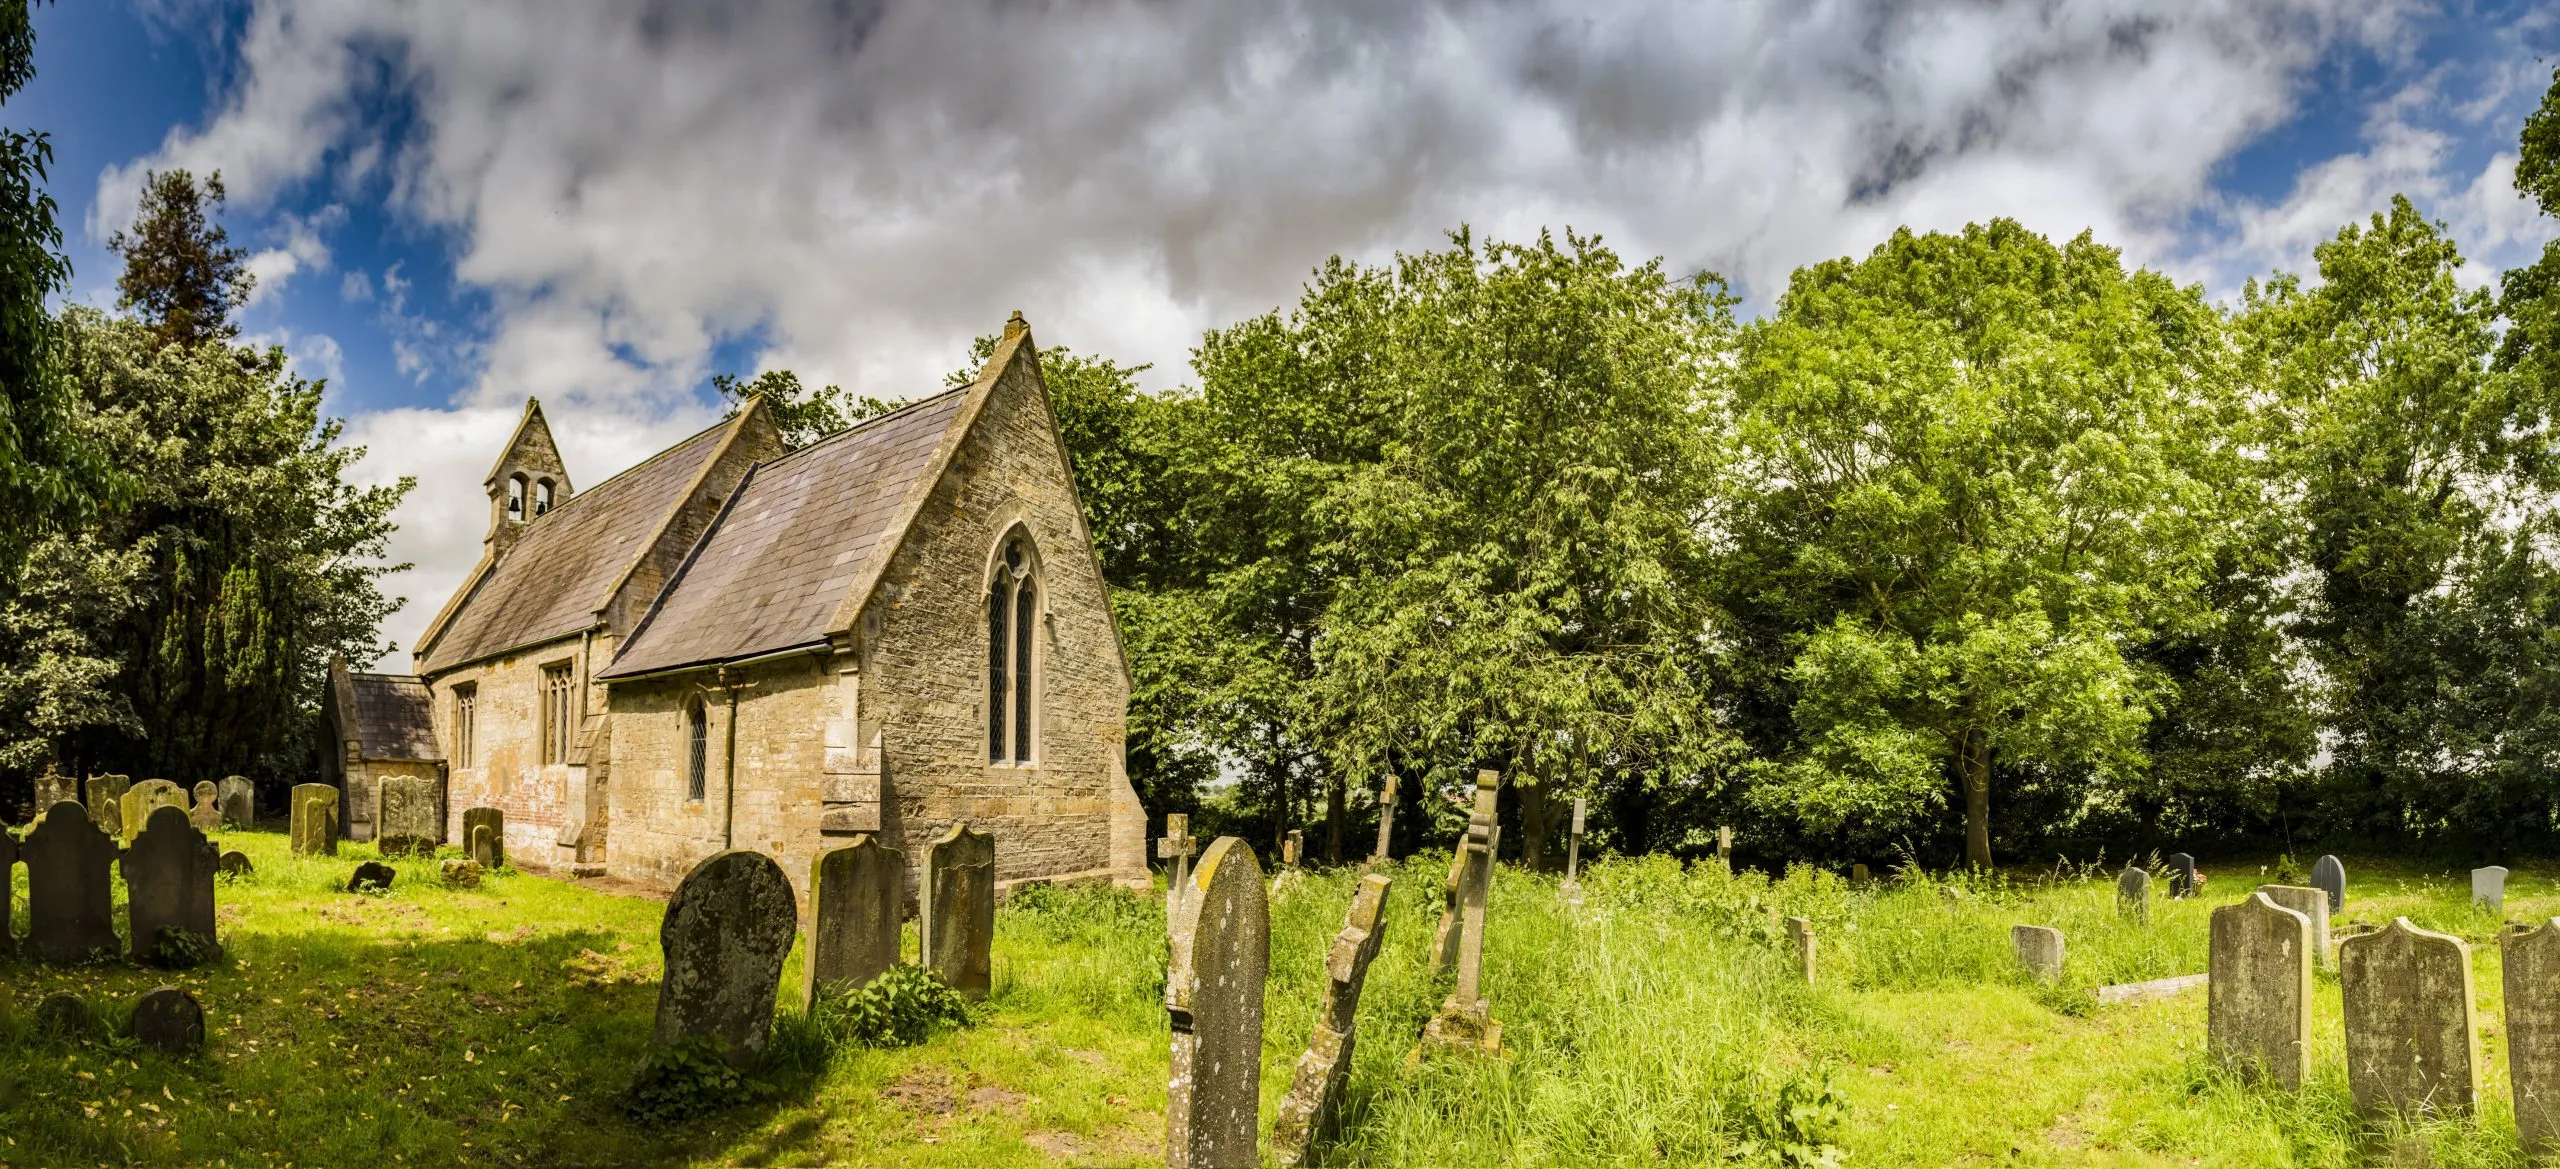 88 historic churches welcome visitors at The West Lindsey Churches Festival